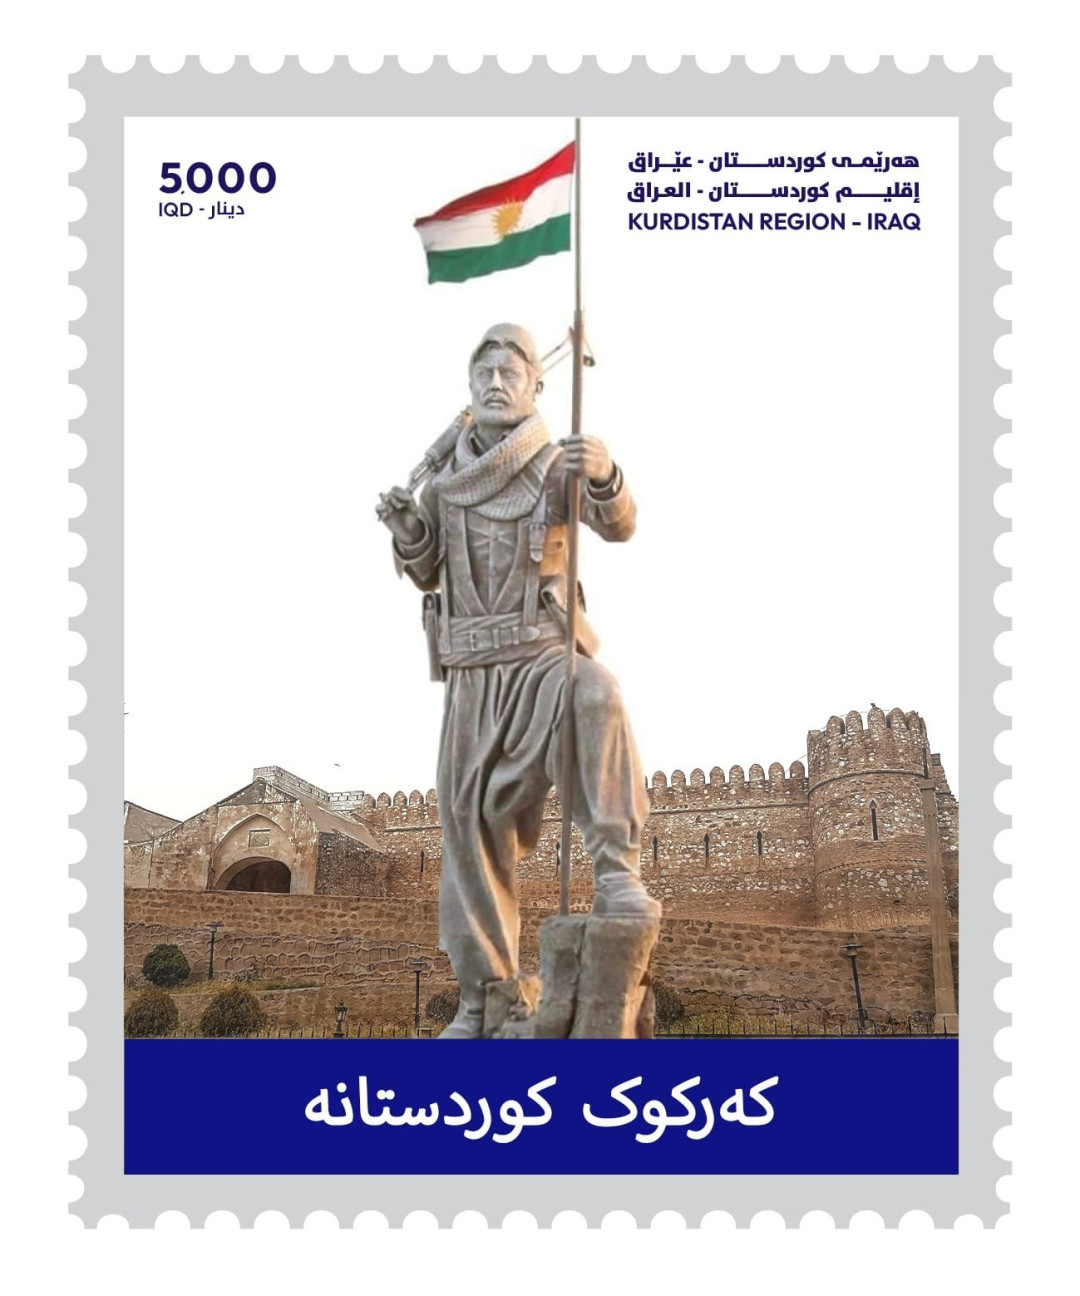 KRG issues official postal stamp featuring Peshmerga statue in Kirkuk